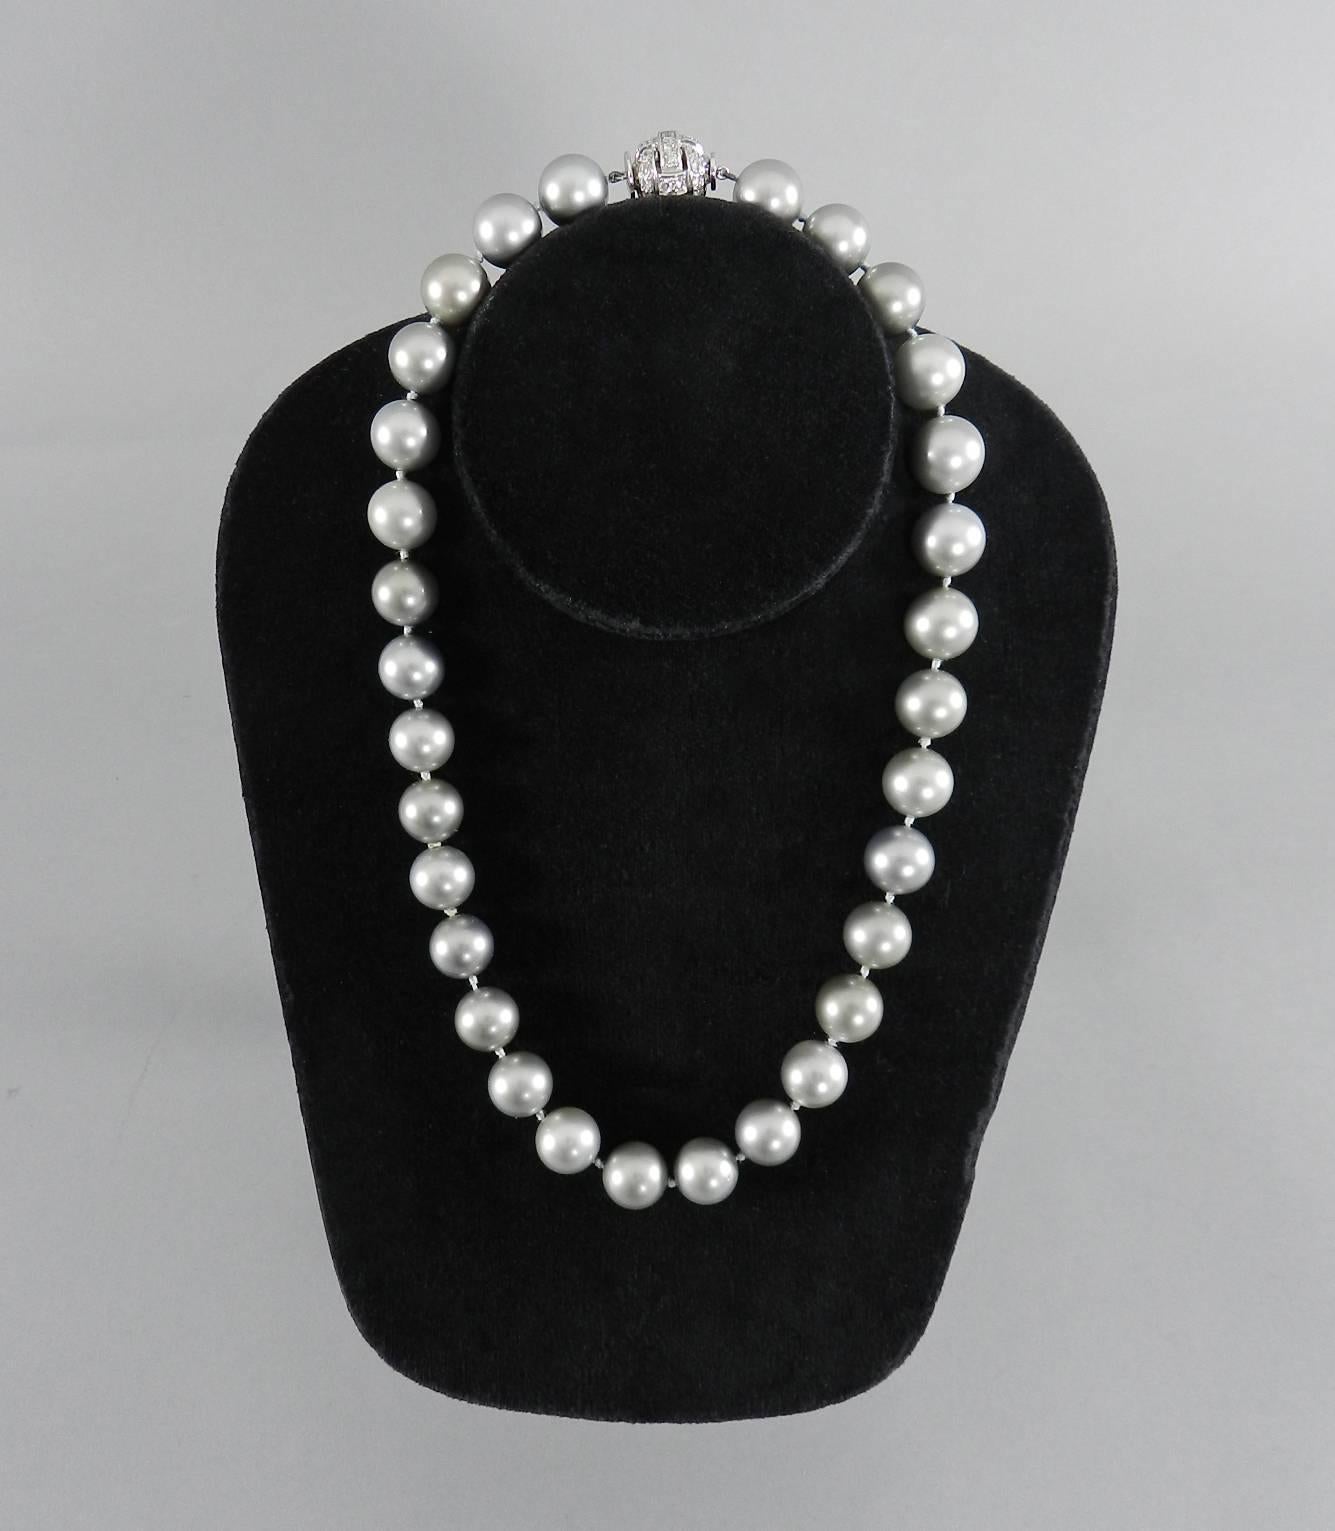 A tahitian cultured pearl necklace with platinum and diamond clasp.  29 gray pearls with silver / green overtones measuring 12-13mm.  18